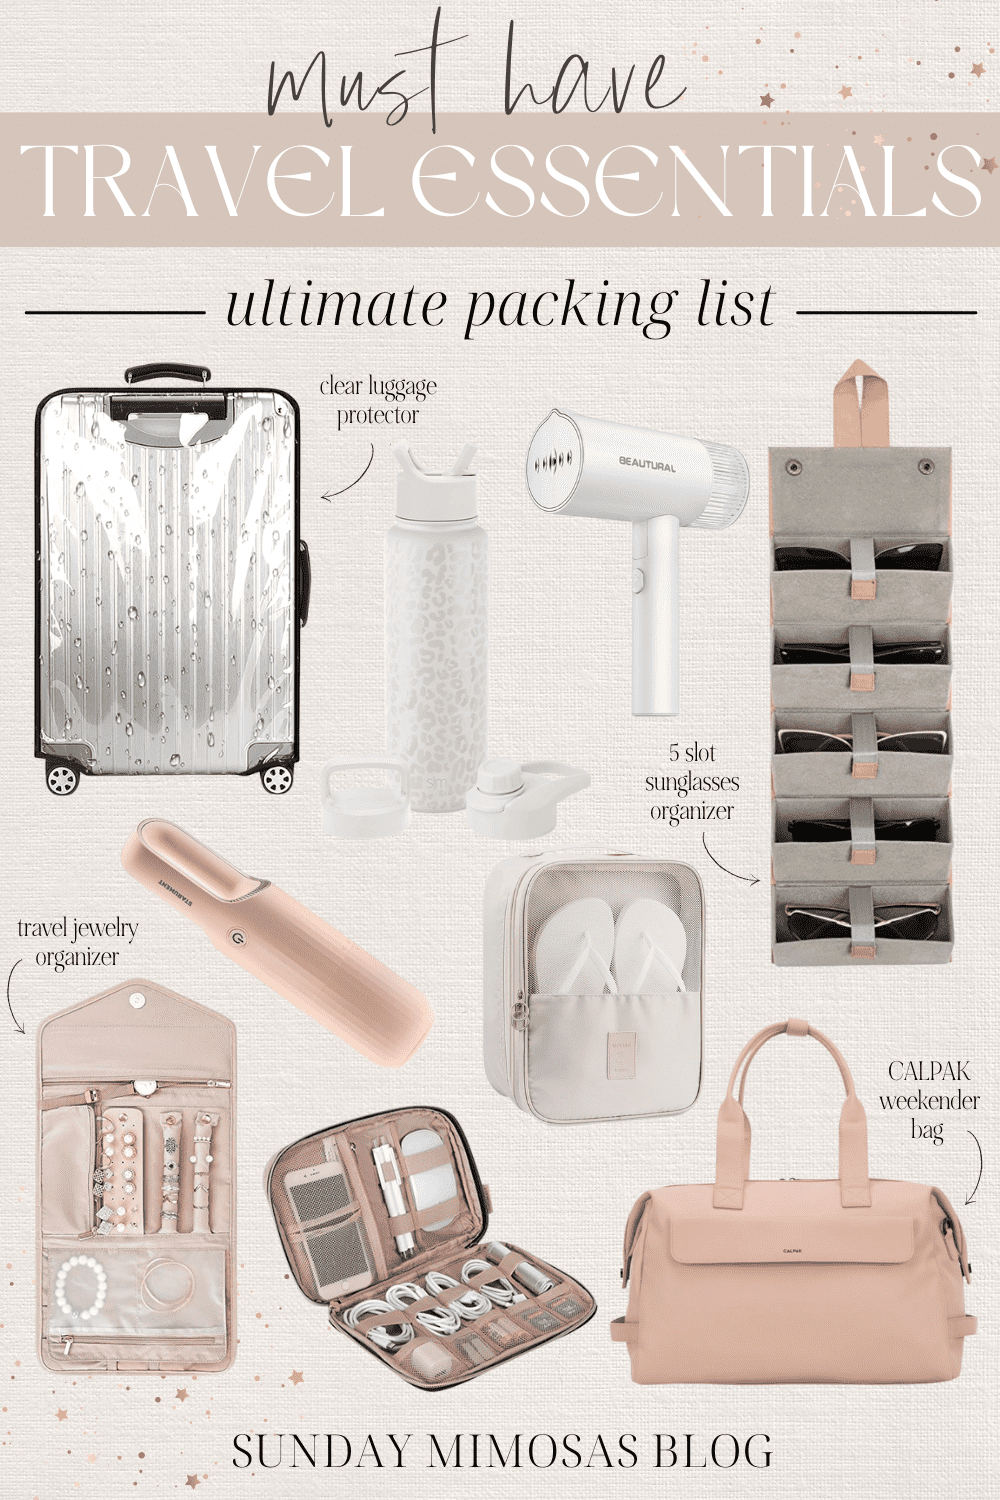 Travel Essentials for Women: 50+ Must-Haves for Any Trip + Packing List  (Free Download) - Your Travel And Health